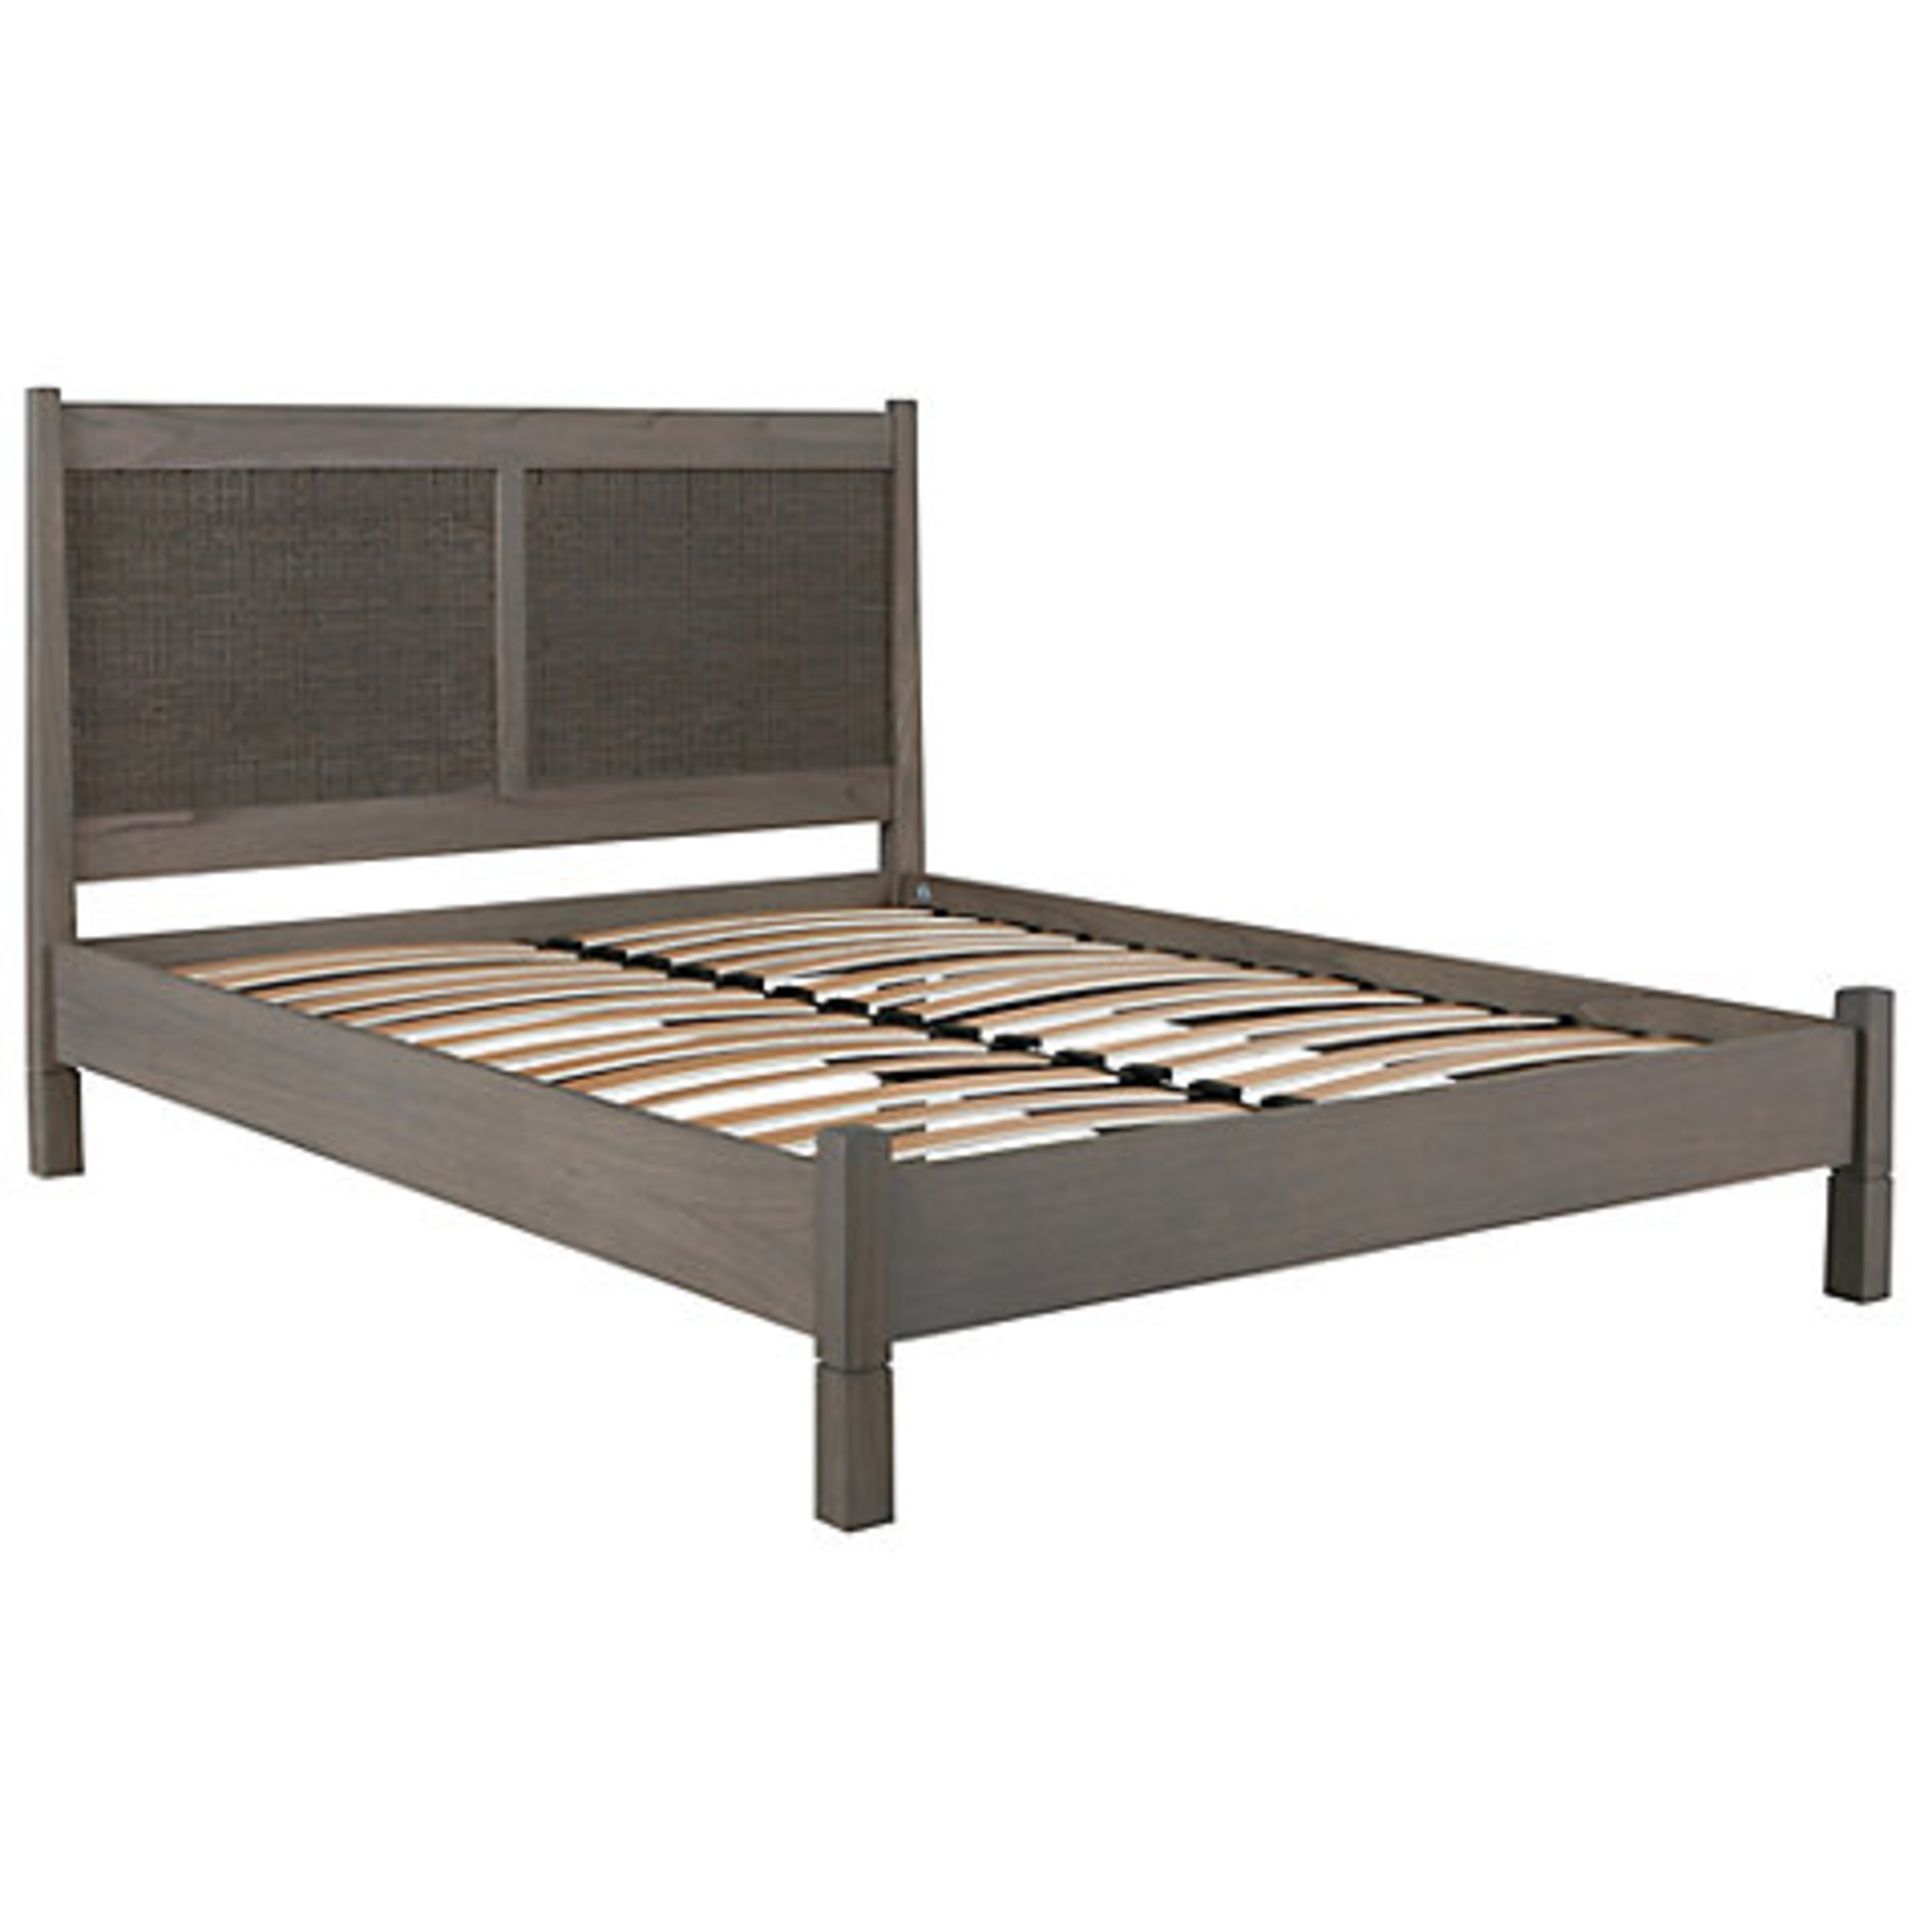 1 x 150CM FLORES BED RRP £260 (NO SLATS) (2450719)(10.7.17) *PLEASE NOTE THAT THE BID PRICE IS